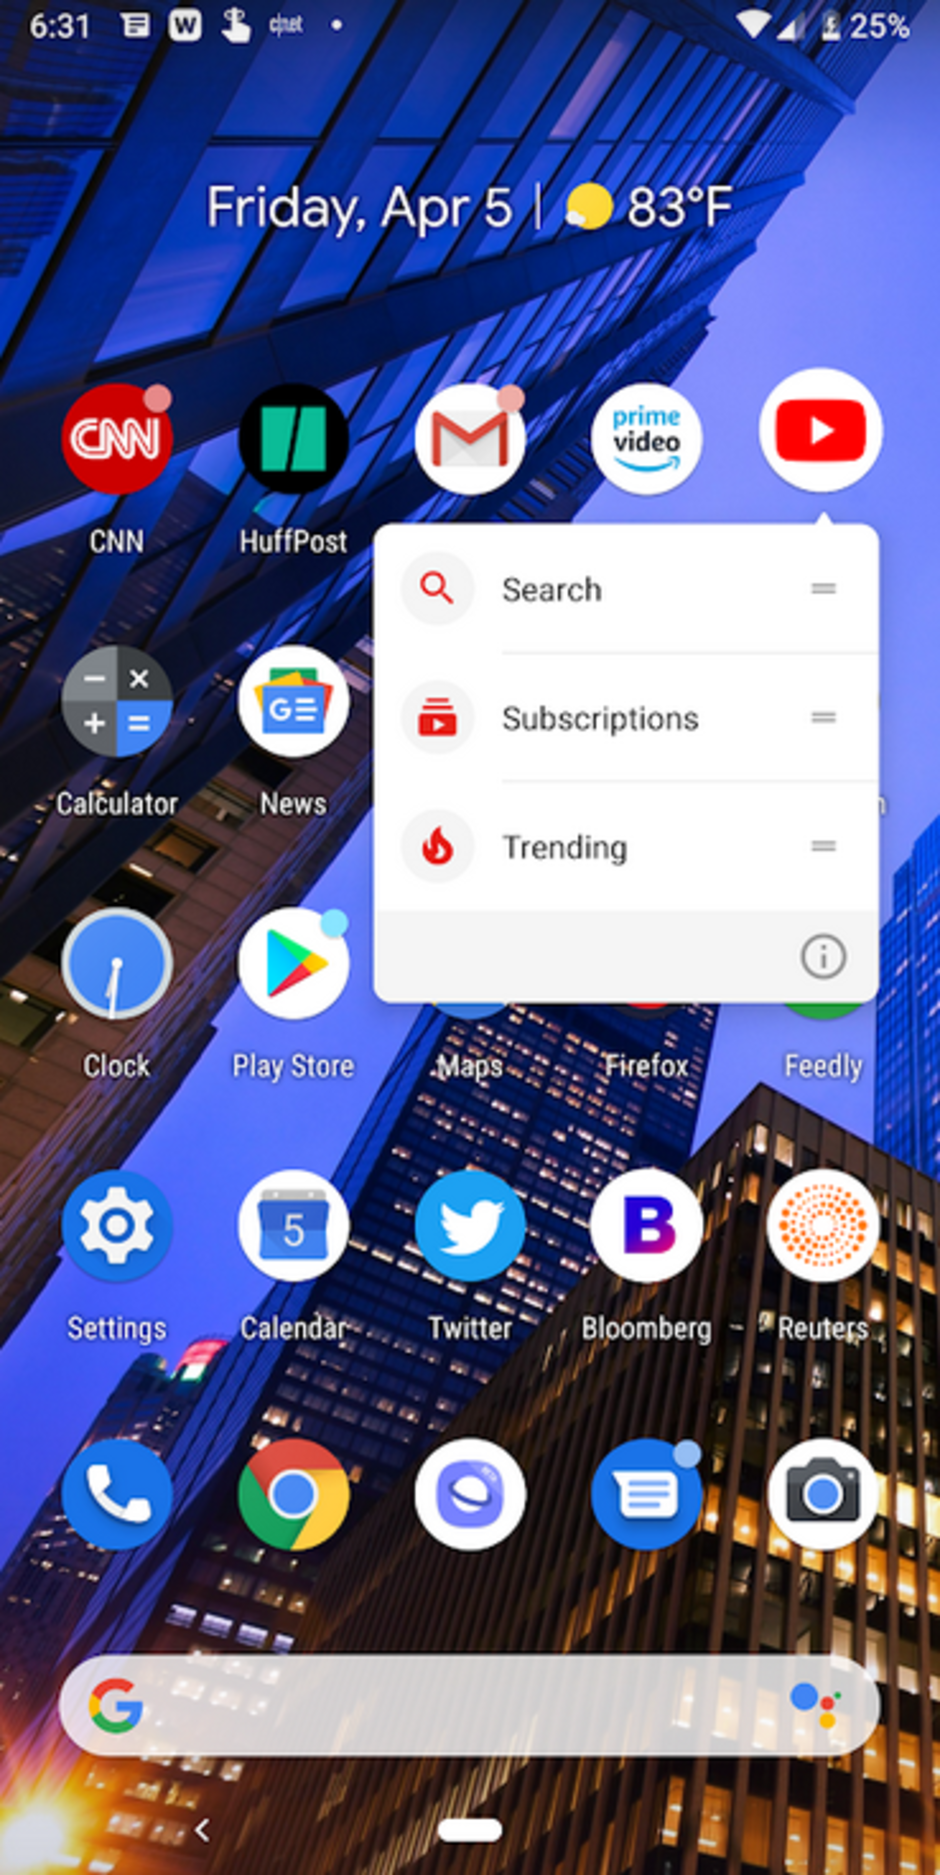 Those with Android 8 or Android 9 can long press on an icon to see shortcut options - Android Q will bring an iconic Apple iPhone feature to Android